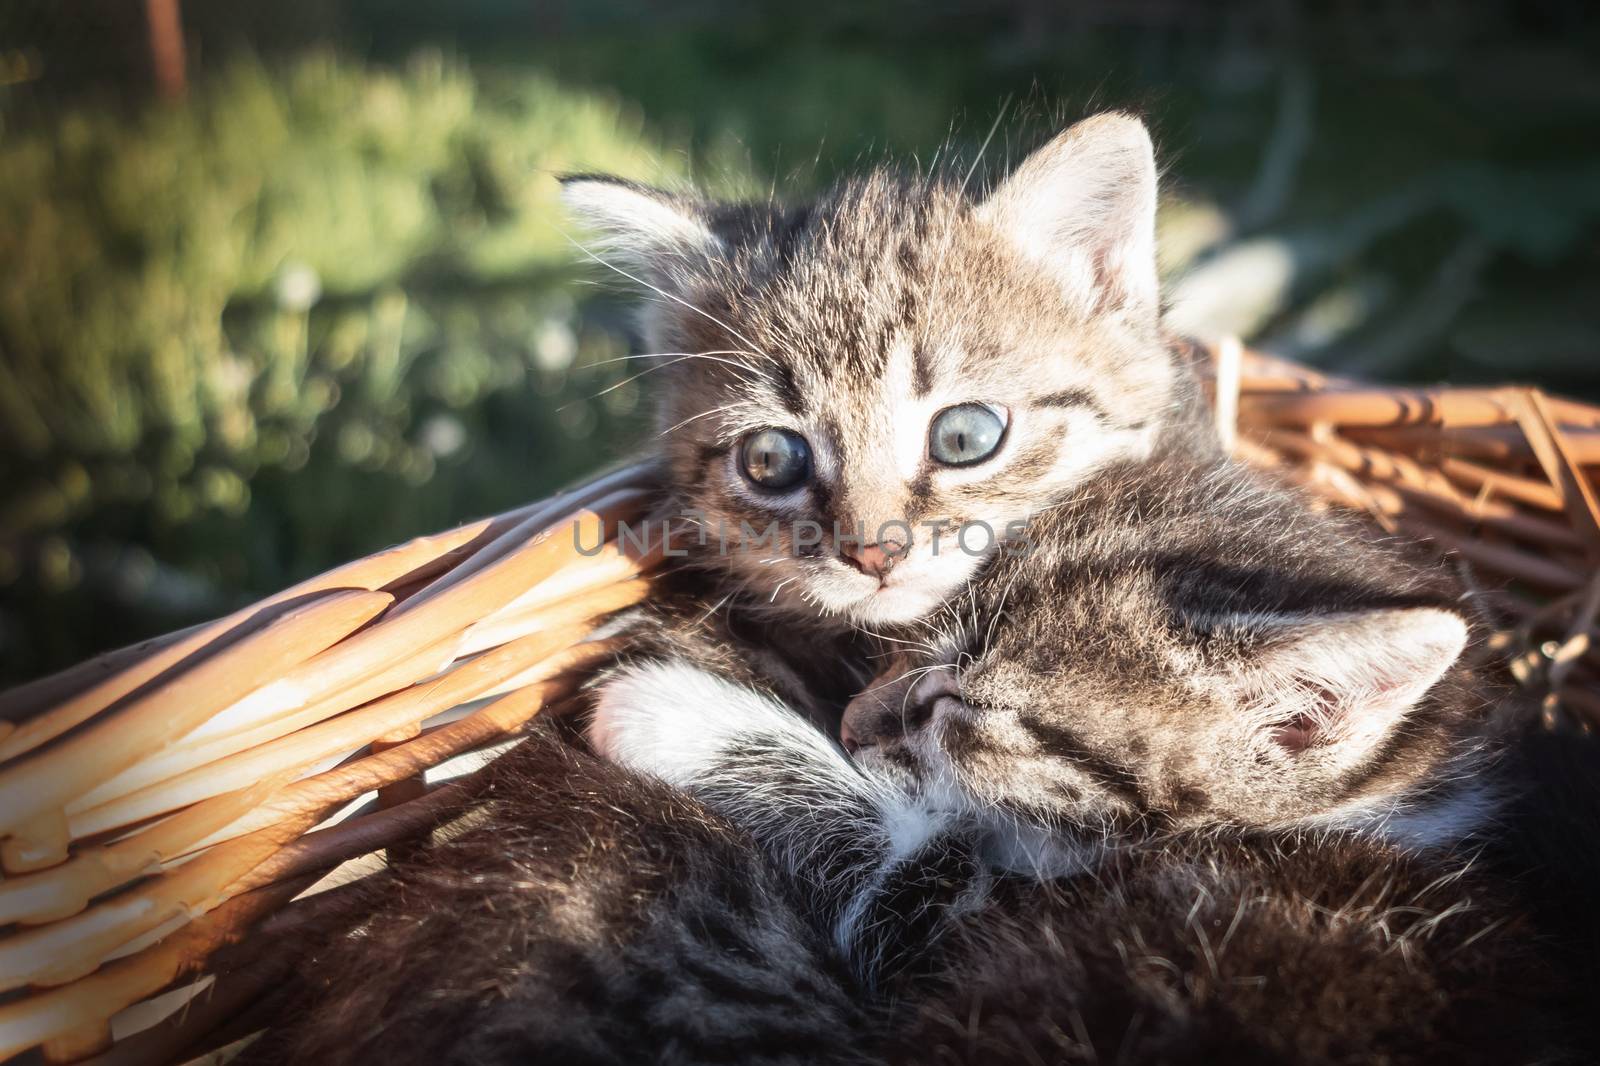 Lovely little frightened kittens peeking out of the basket, outdoors.